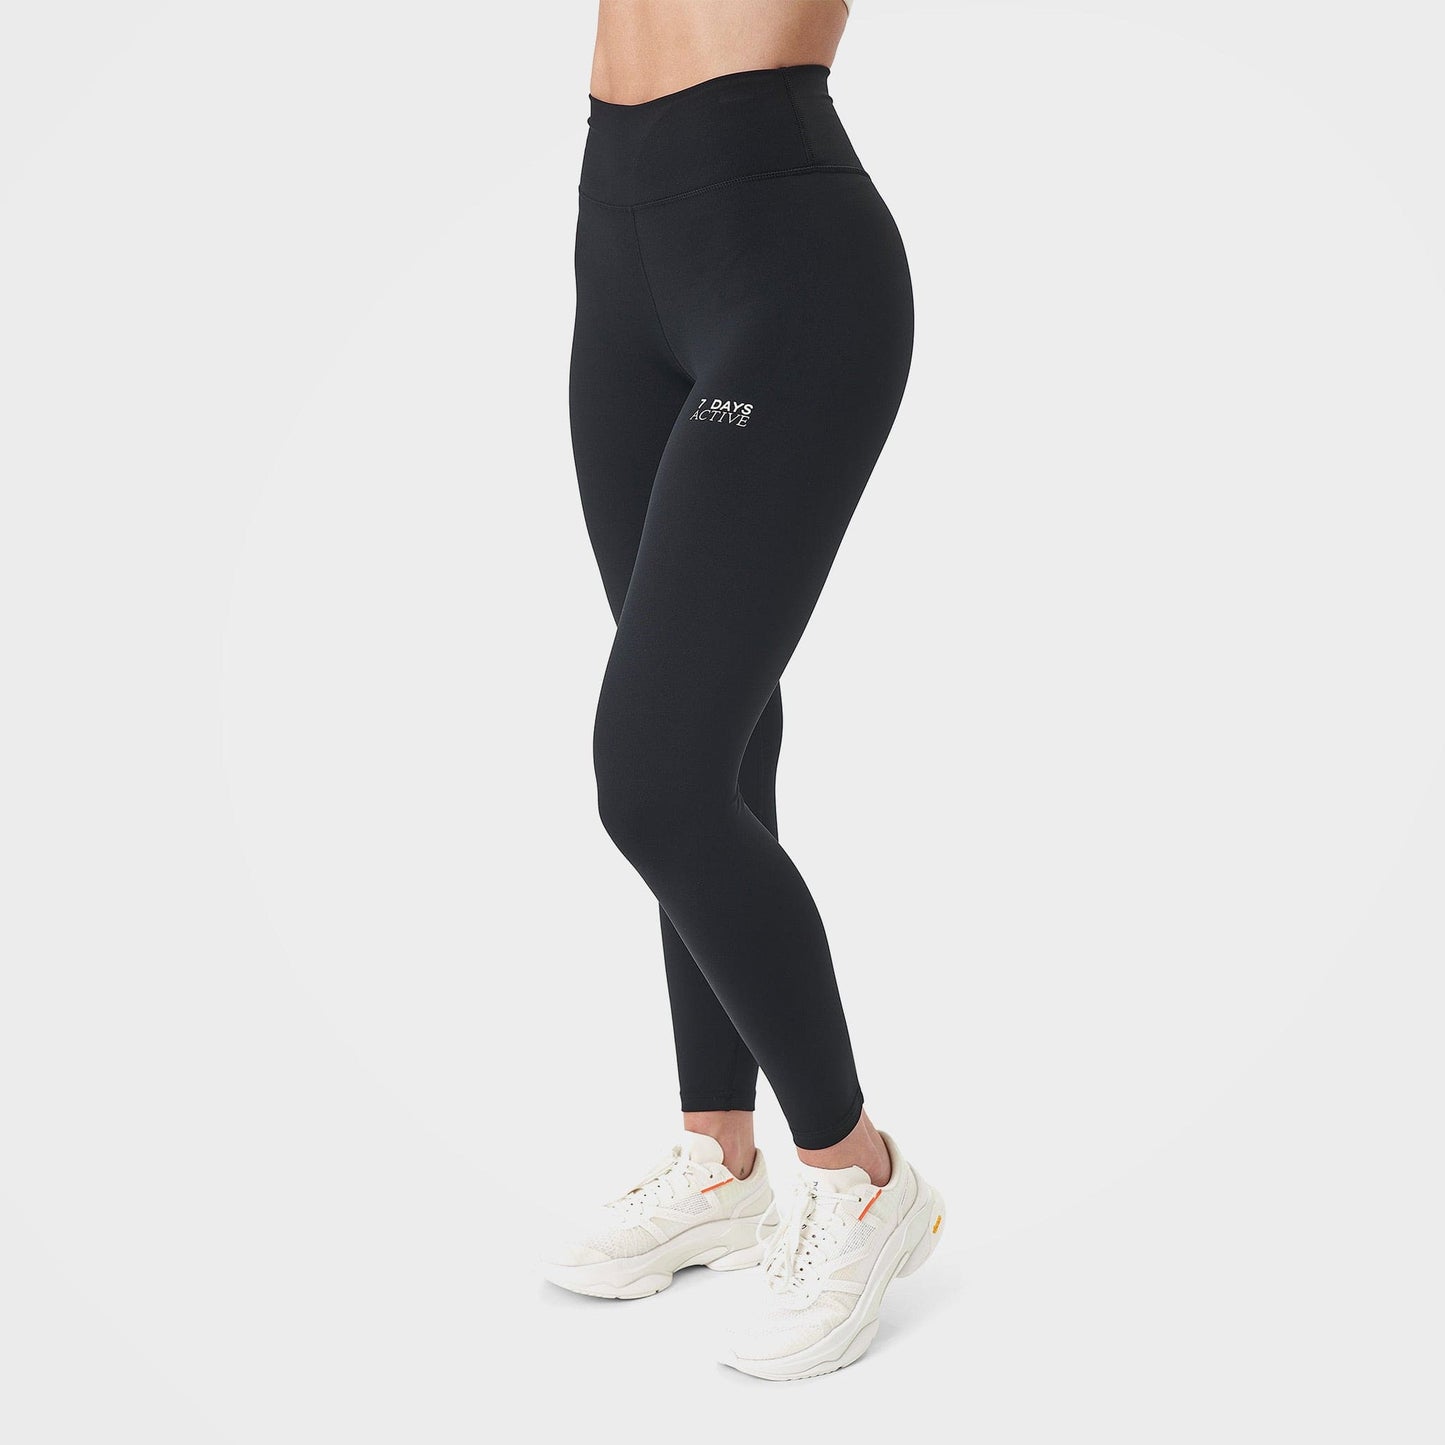 Black Women's Leggings, Signature Tights by 7Days Active